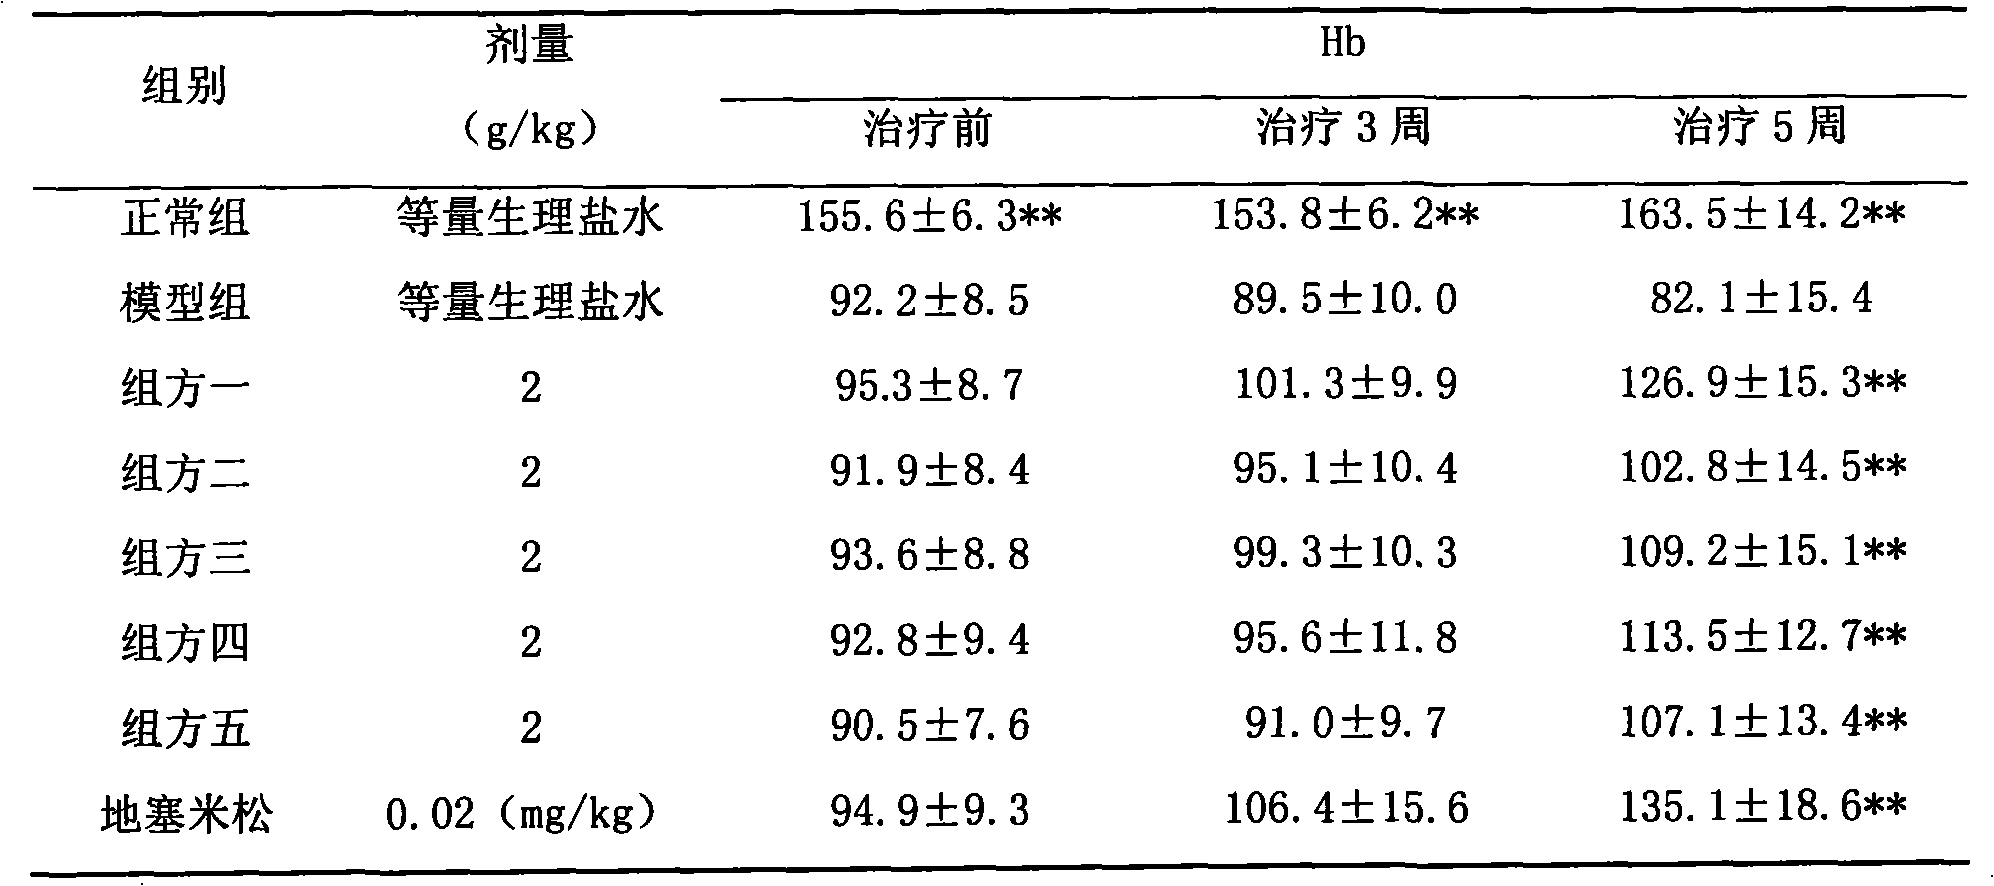 Shenkang dripping pill for treating chronic renal failure and preparation method thereof